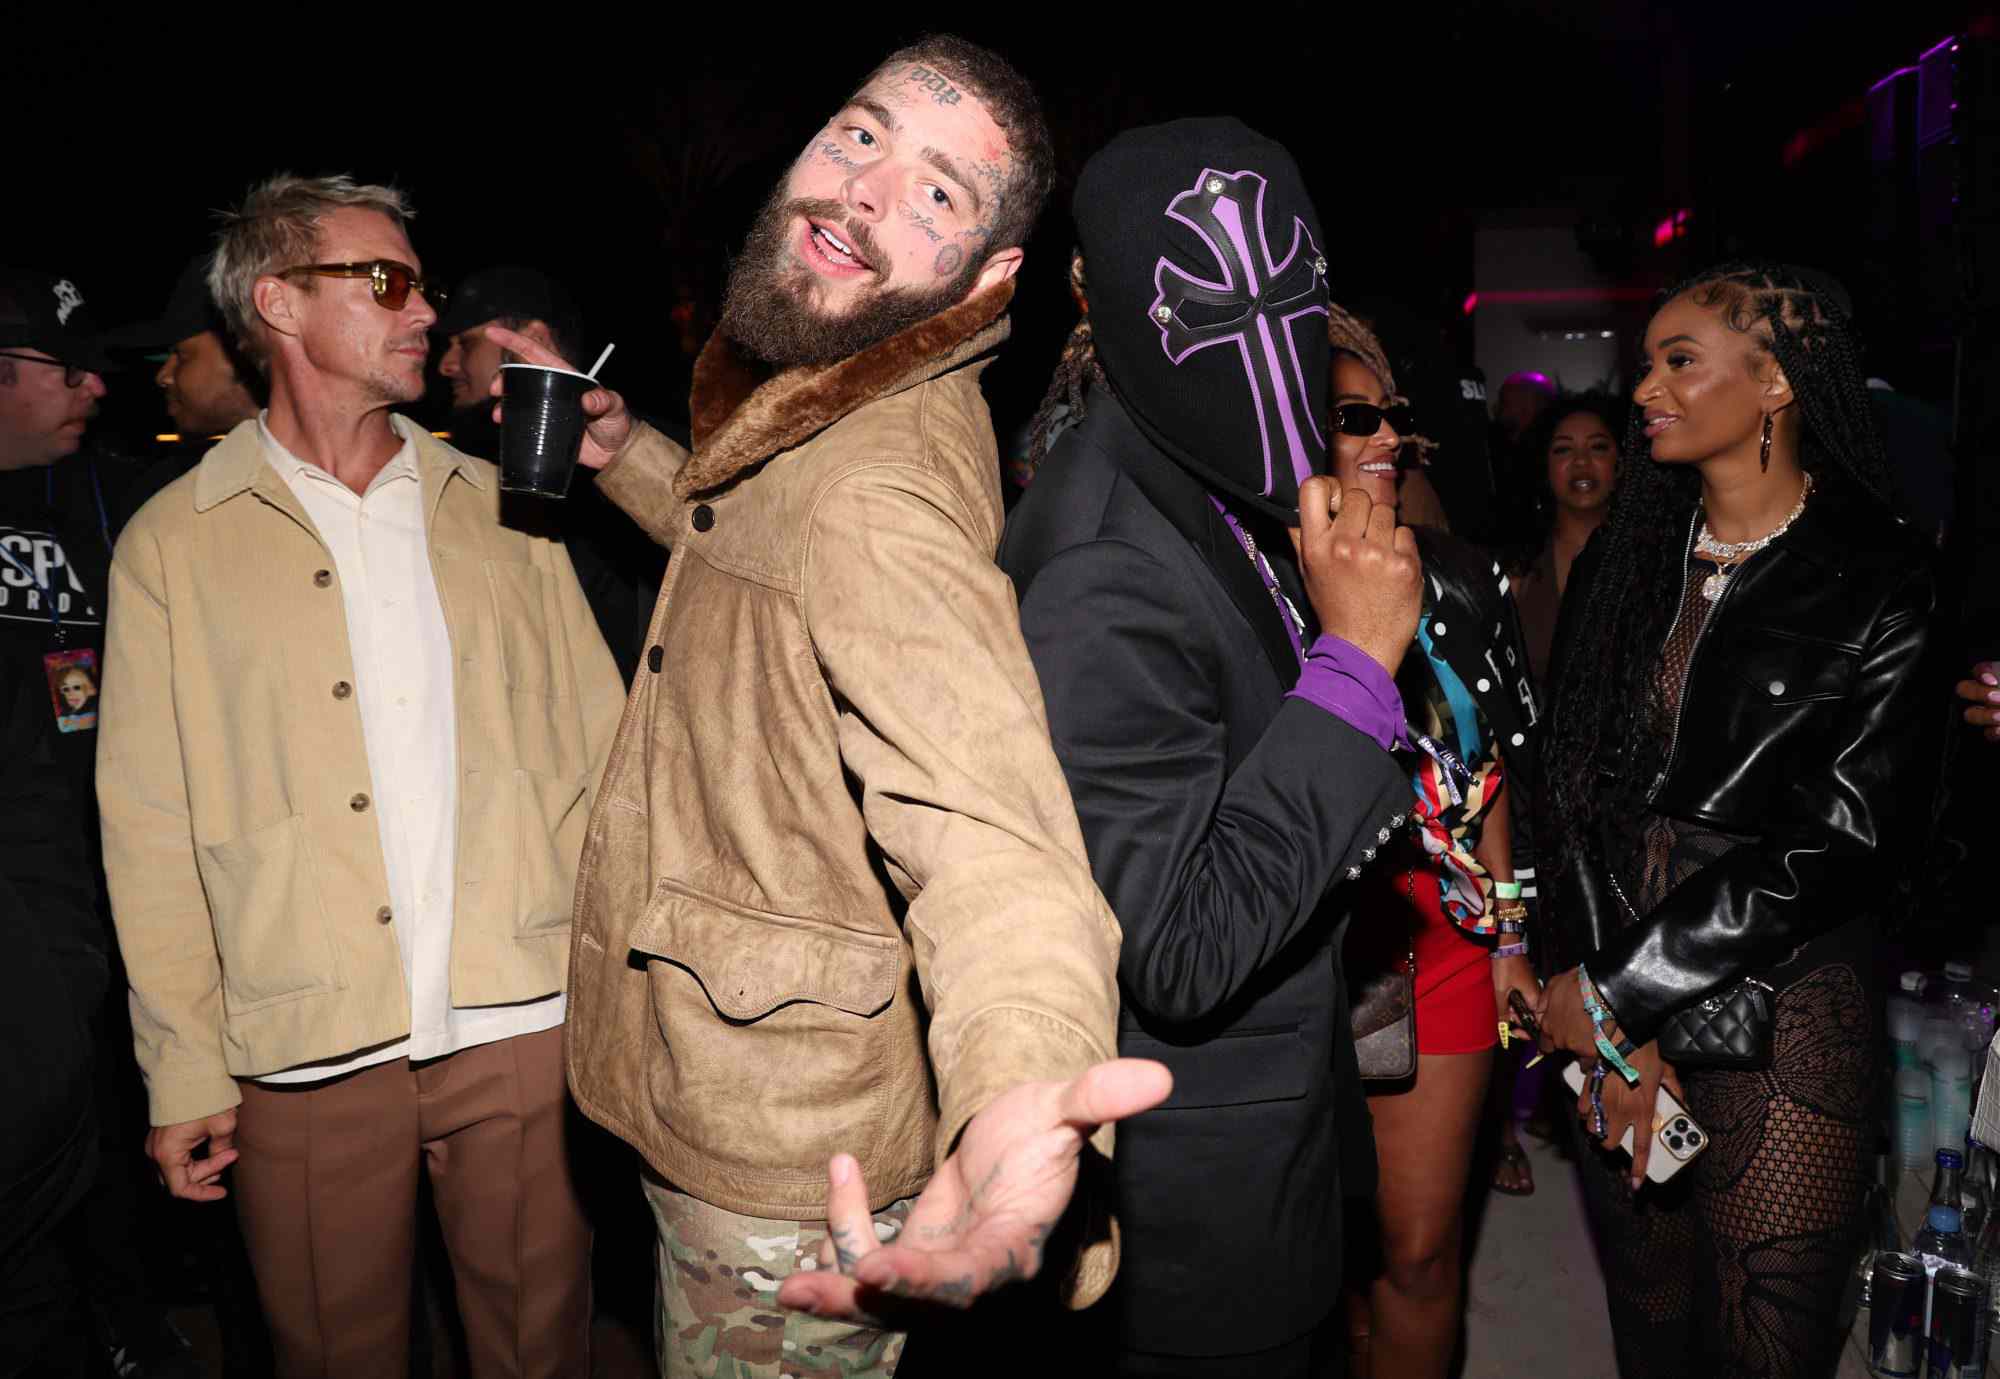 COACHELLA, CALIFORNIA - APRIL 14: Post Malone and Metro Boomin enjoy Casamigos at TAO Desert Nights presented by Jeeter at Zenyara on April 14, 2023 in Coachella, California. (Photo by Jerritt Clark/Getty Images for Casamigos )